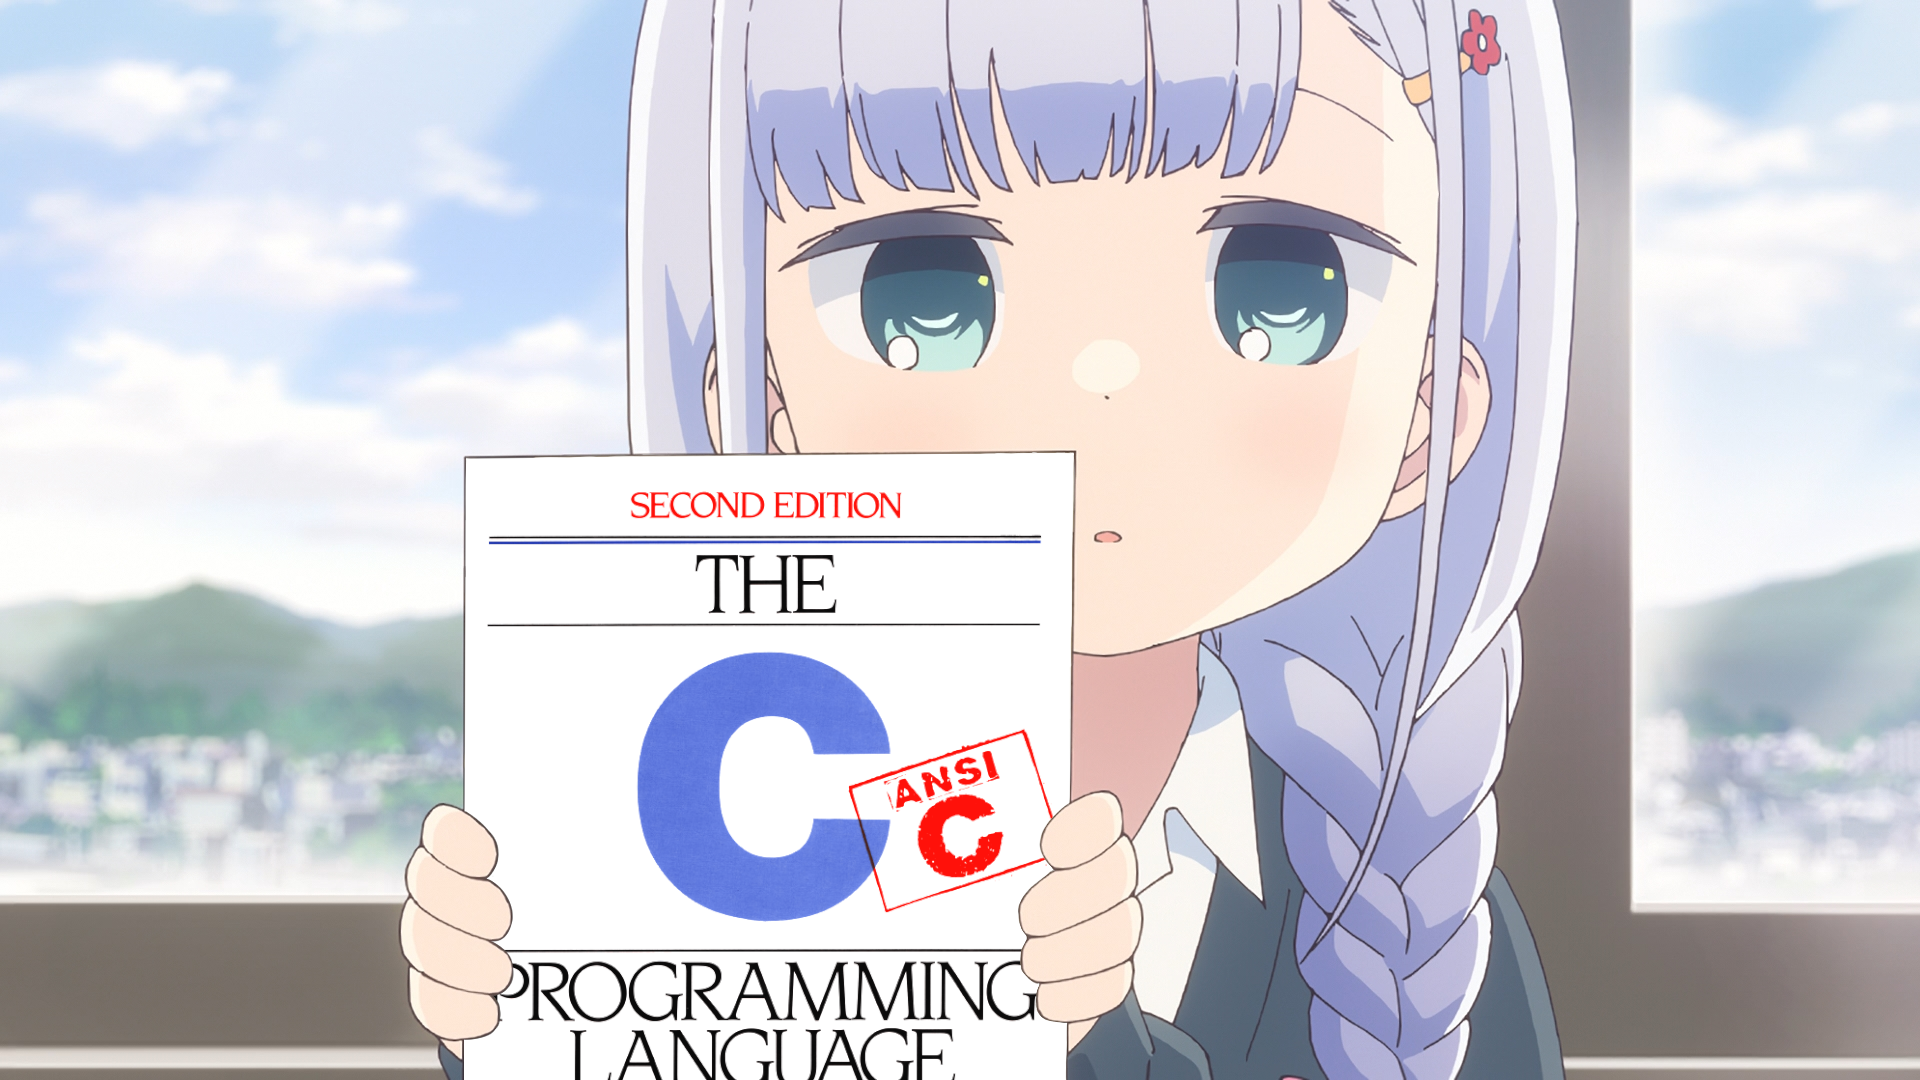 code - how many programmers watch anime, cause i have 3 friends who can  code and they all watch anime, and if you watch anime d - devRant